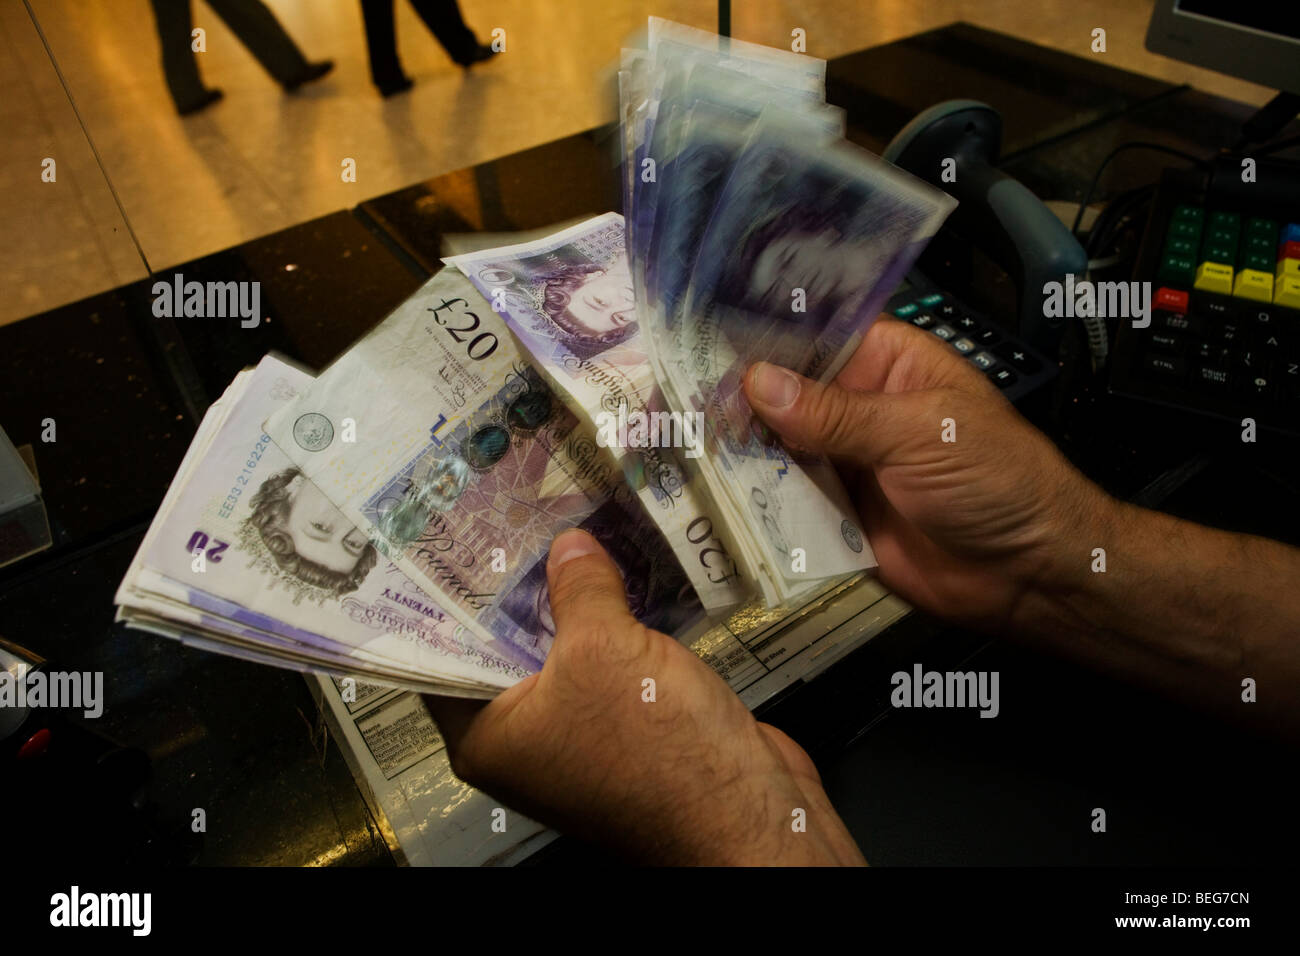 An assistant counts through blurred Pounds Sterling notes at the Travelex bureau de change at Heathrow Airport's Terminal 5. Stock Photo